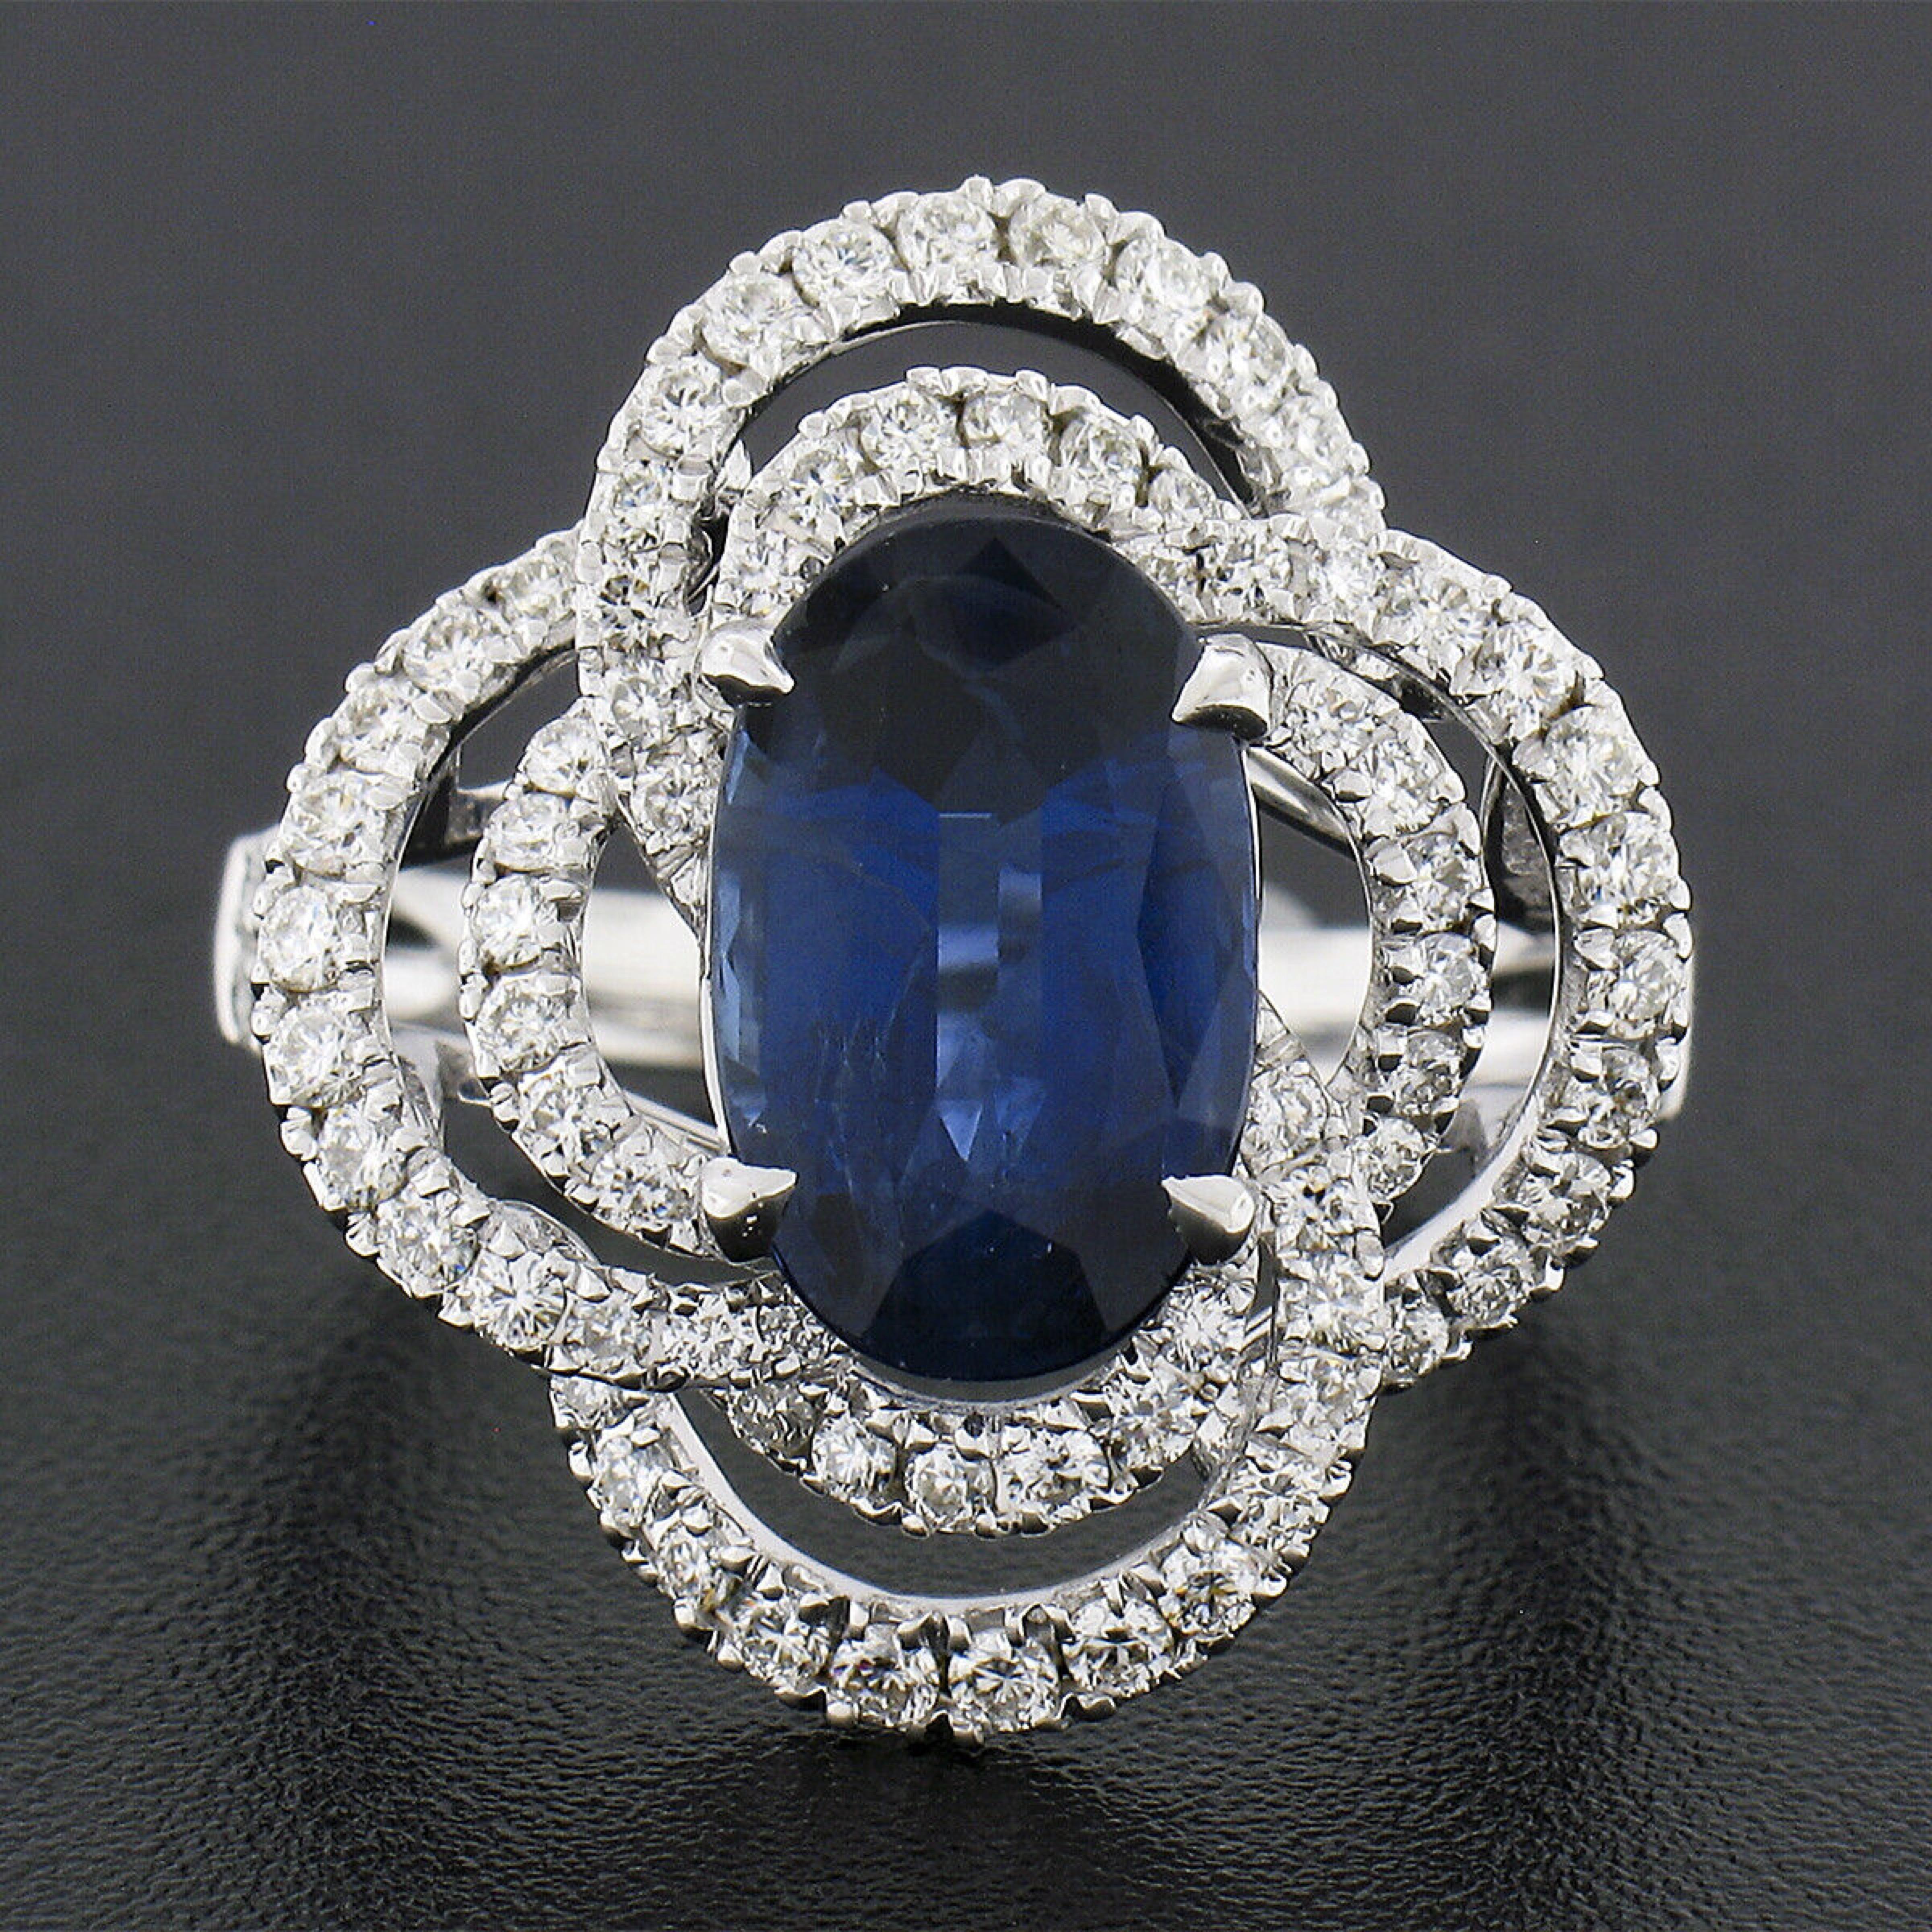 Here we have a truly breathtaking cocktail ring that was crafted from solid 18k white gold featuring a GIA certified, natural sapphire stone neatly prong set at the center of a fiery diamond drenched infinity swirl design. The elongated oval cut